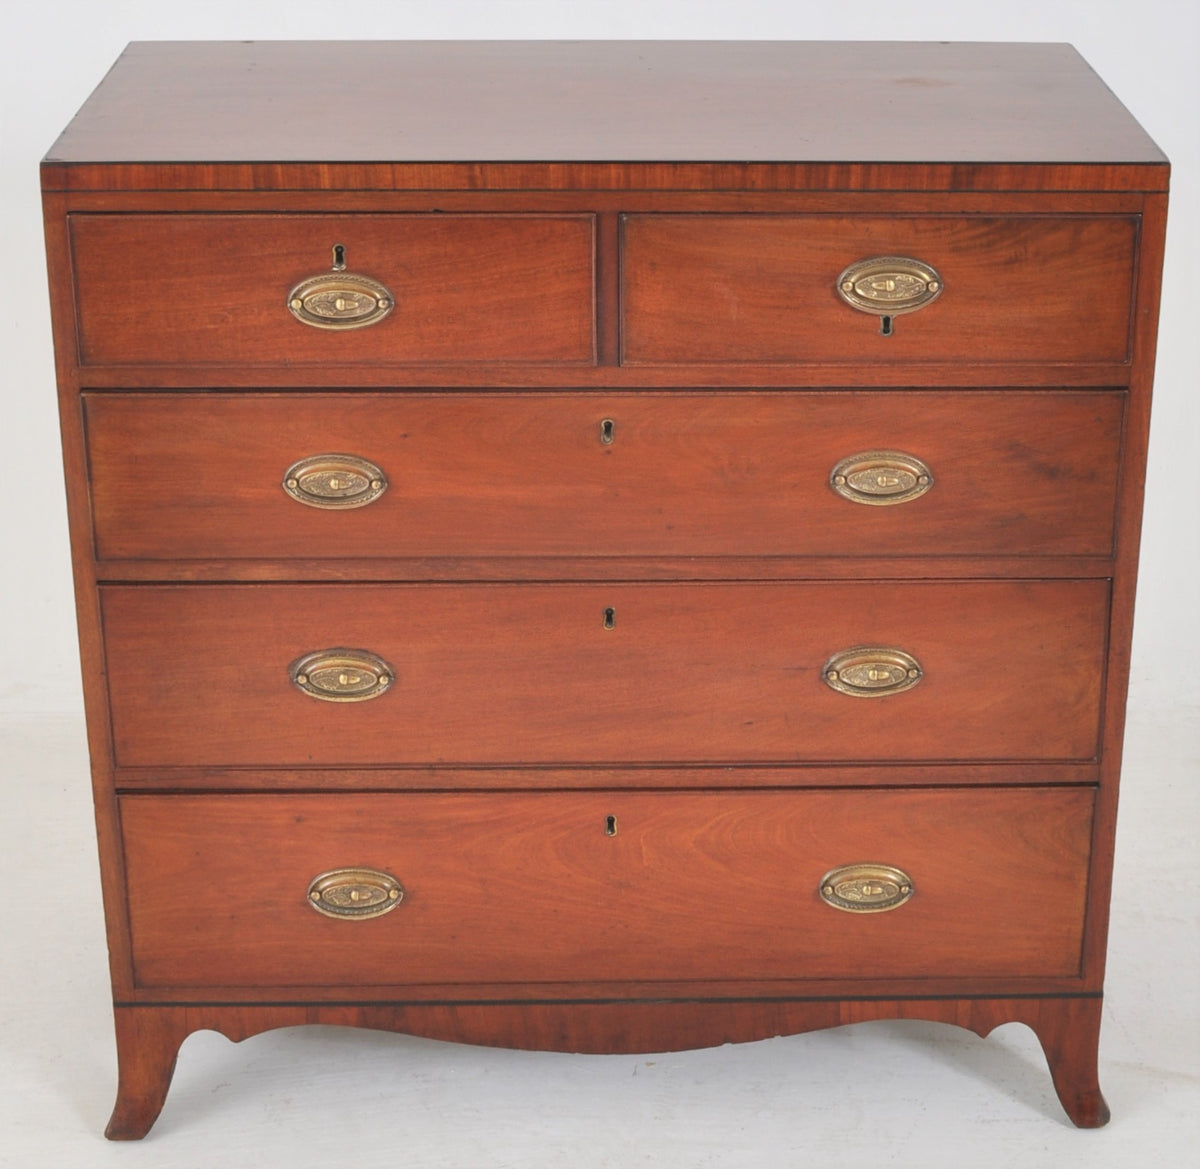 Antique English Mahogany "Caddy Top" Chest of Drawers, Circa 1805